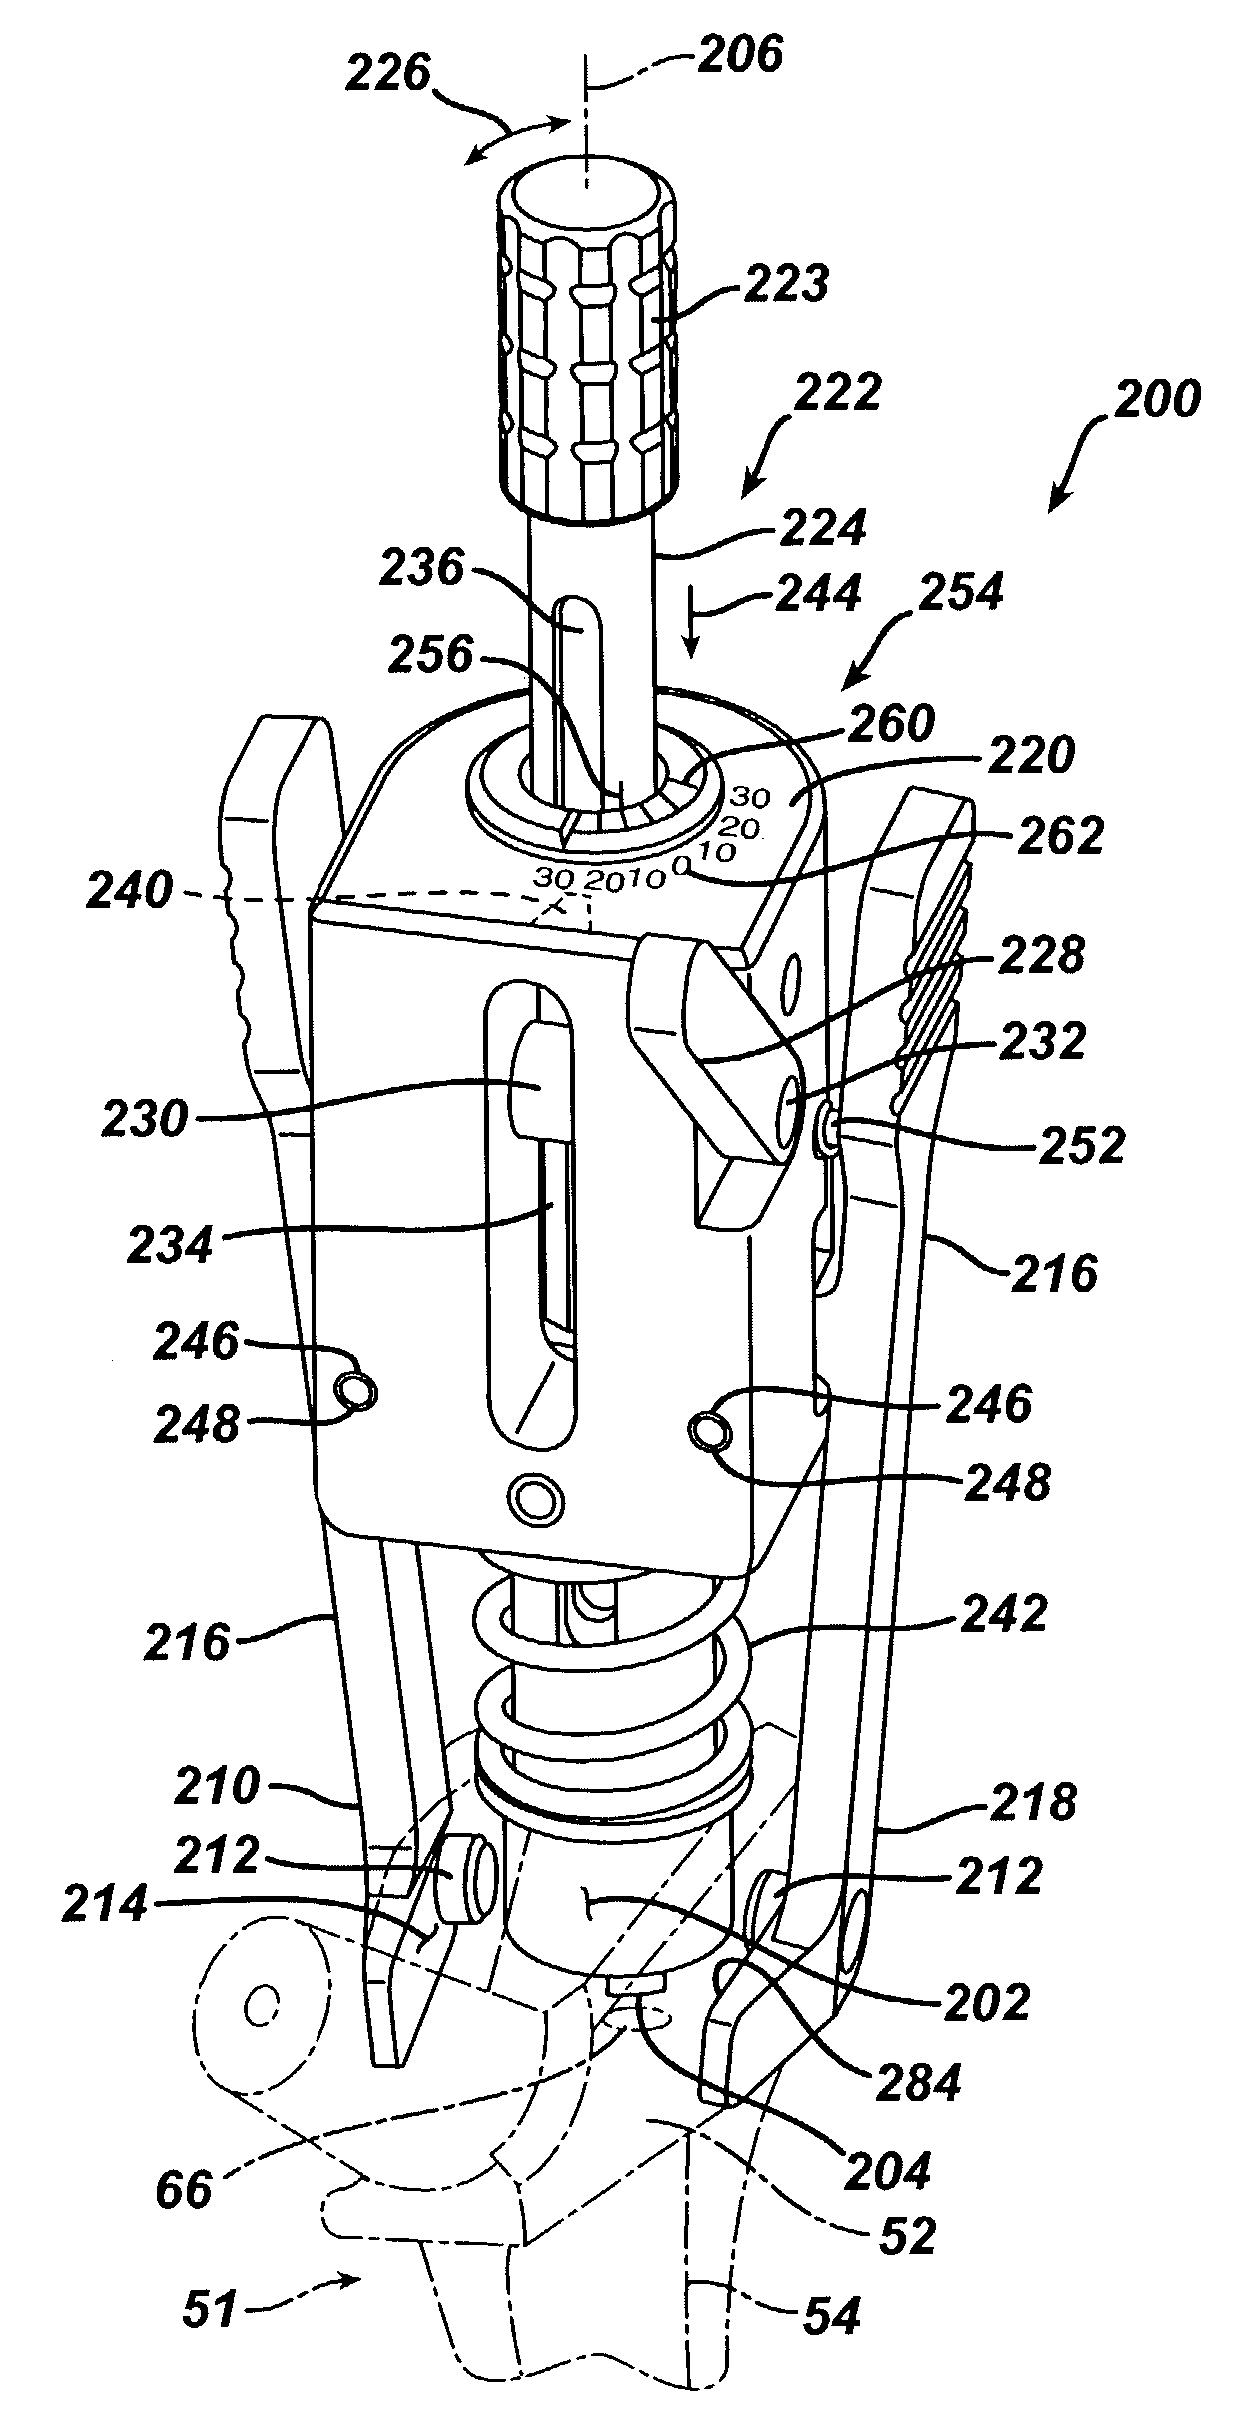 Alignment device for modular implants and method